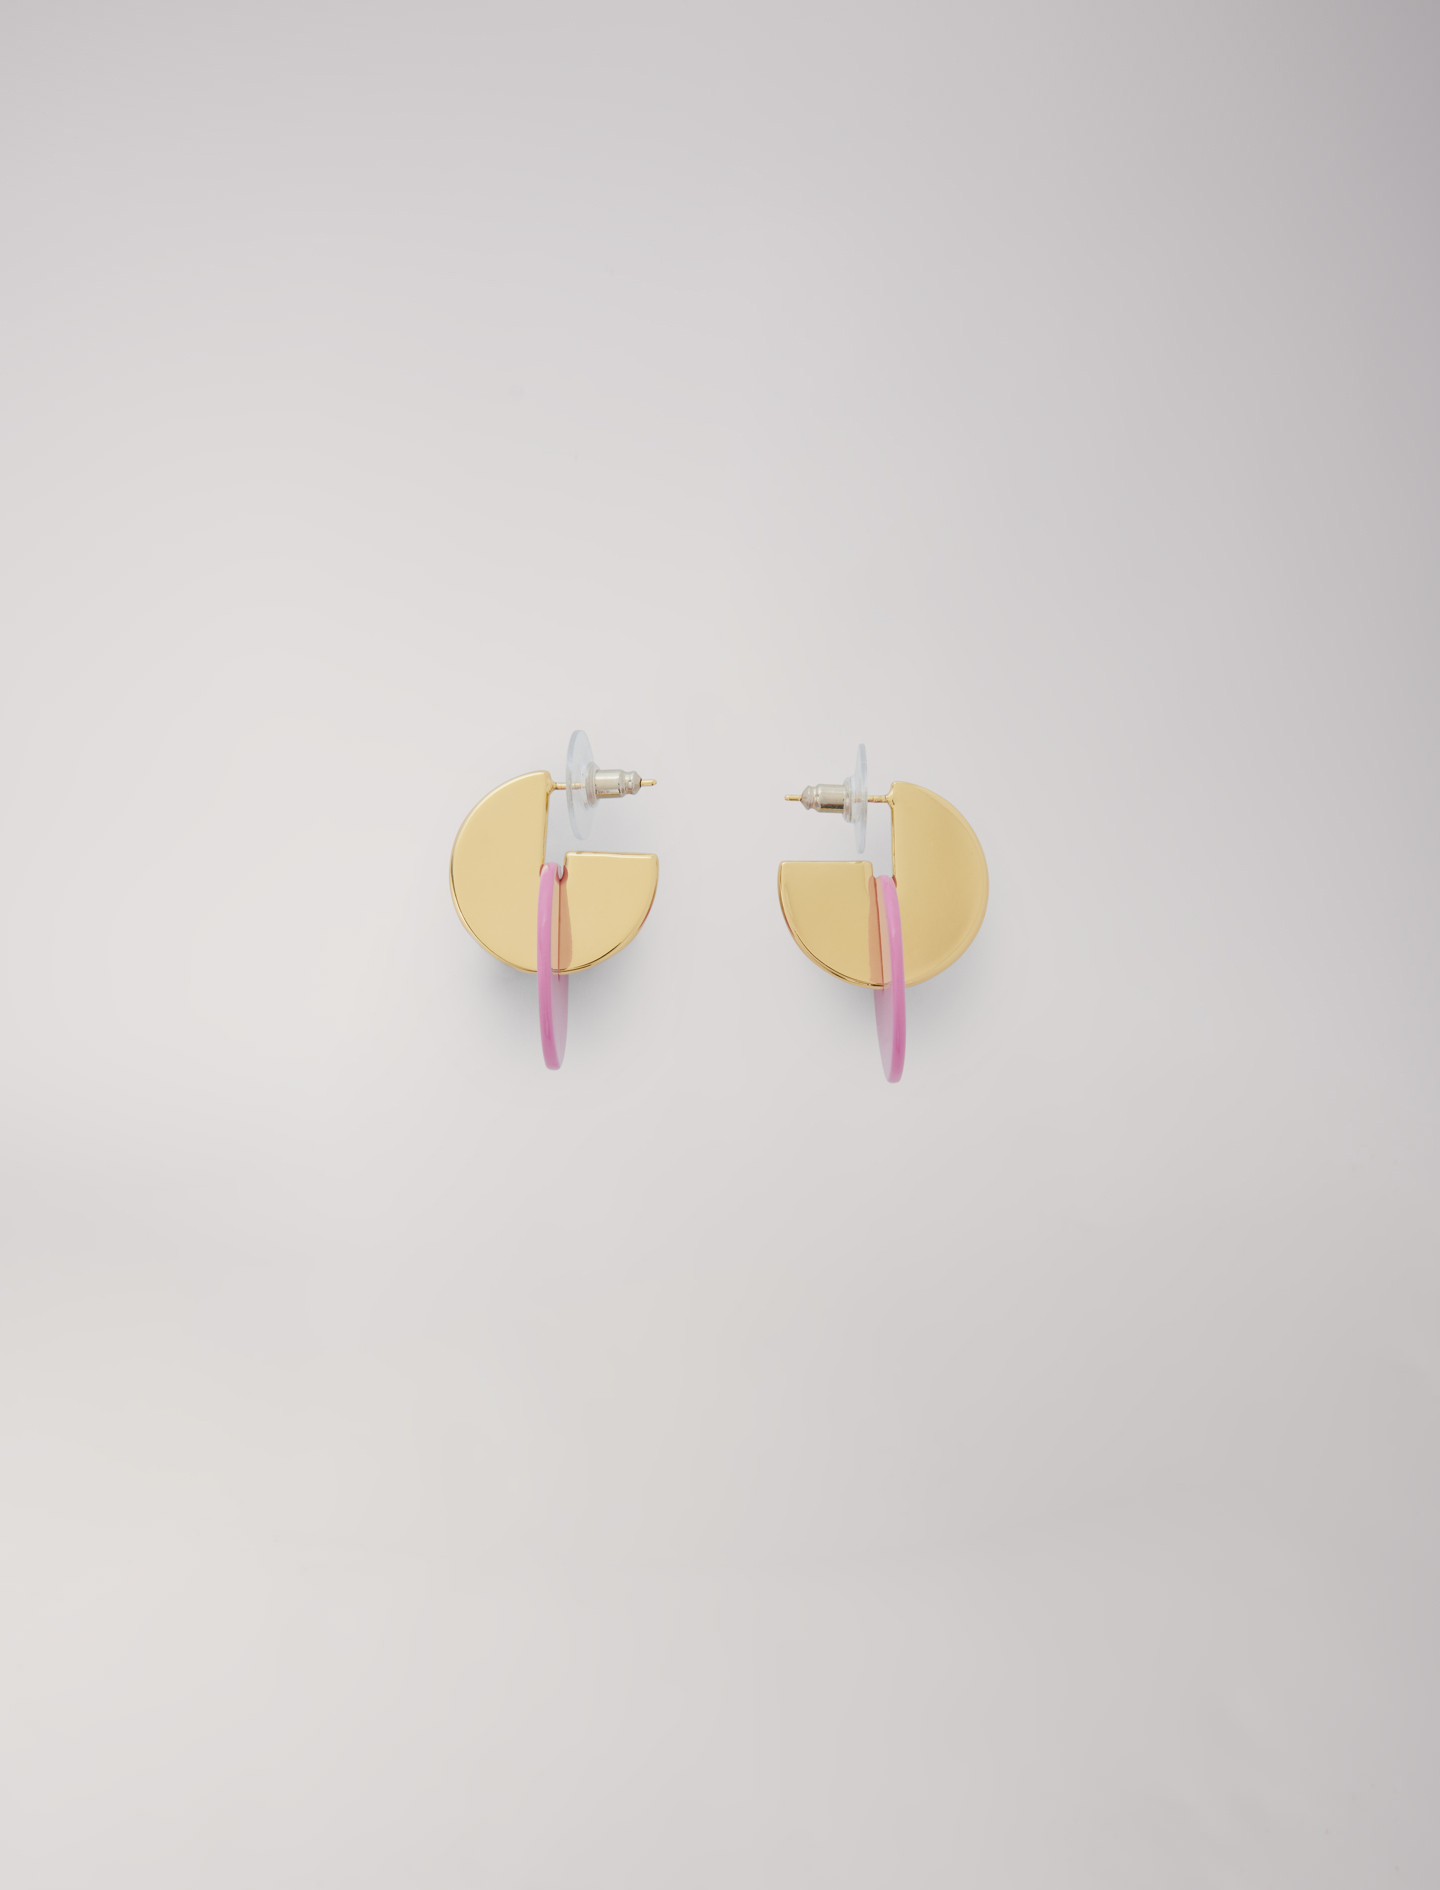 Mixte's brass, Enameled earrings for Spring/Summer, size Mixte-Jewelry-OS (ONE SIZE), in color Gold / Yellow